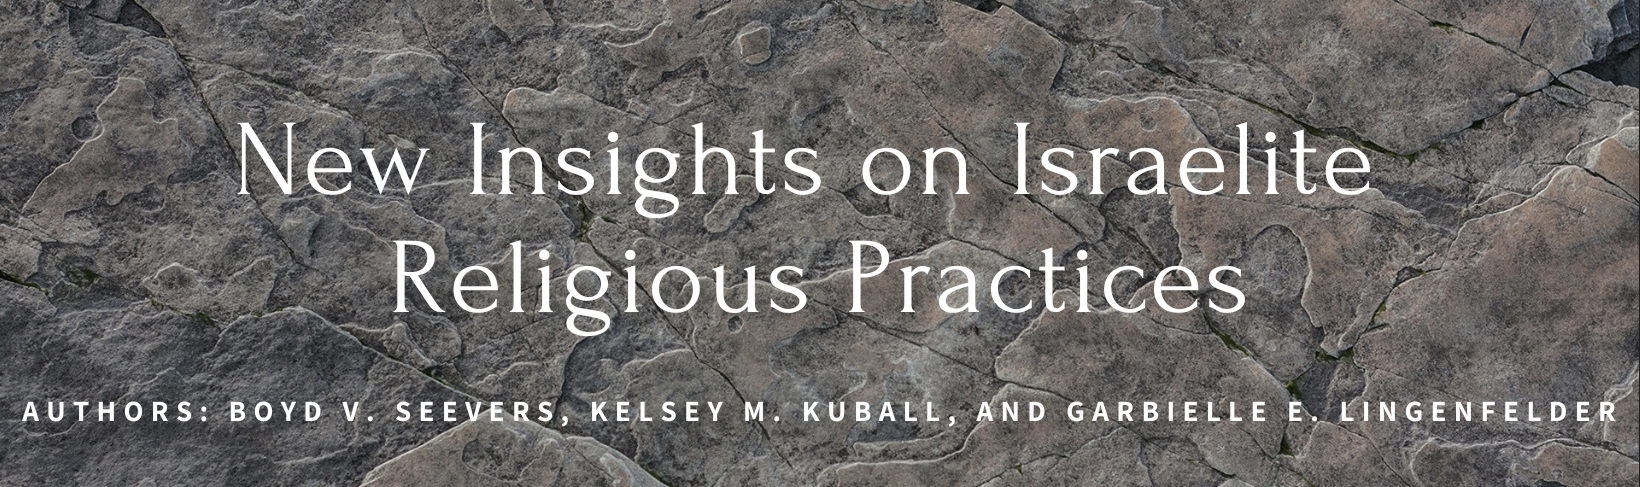 New Insights on Israeilite Practices